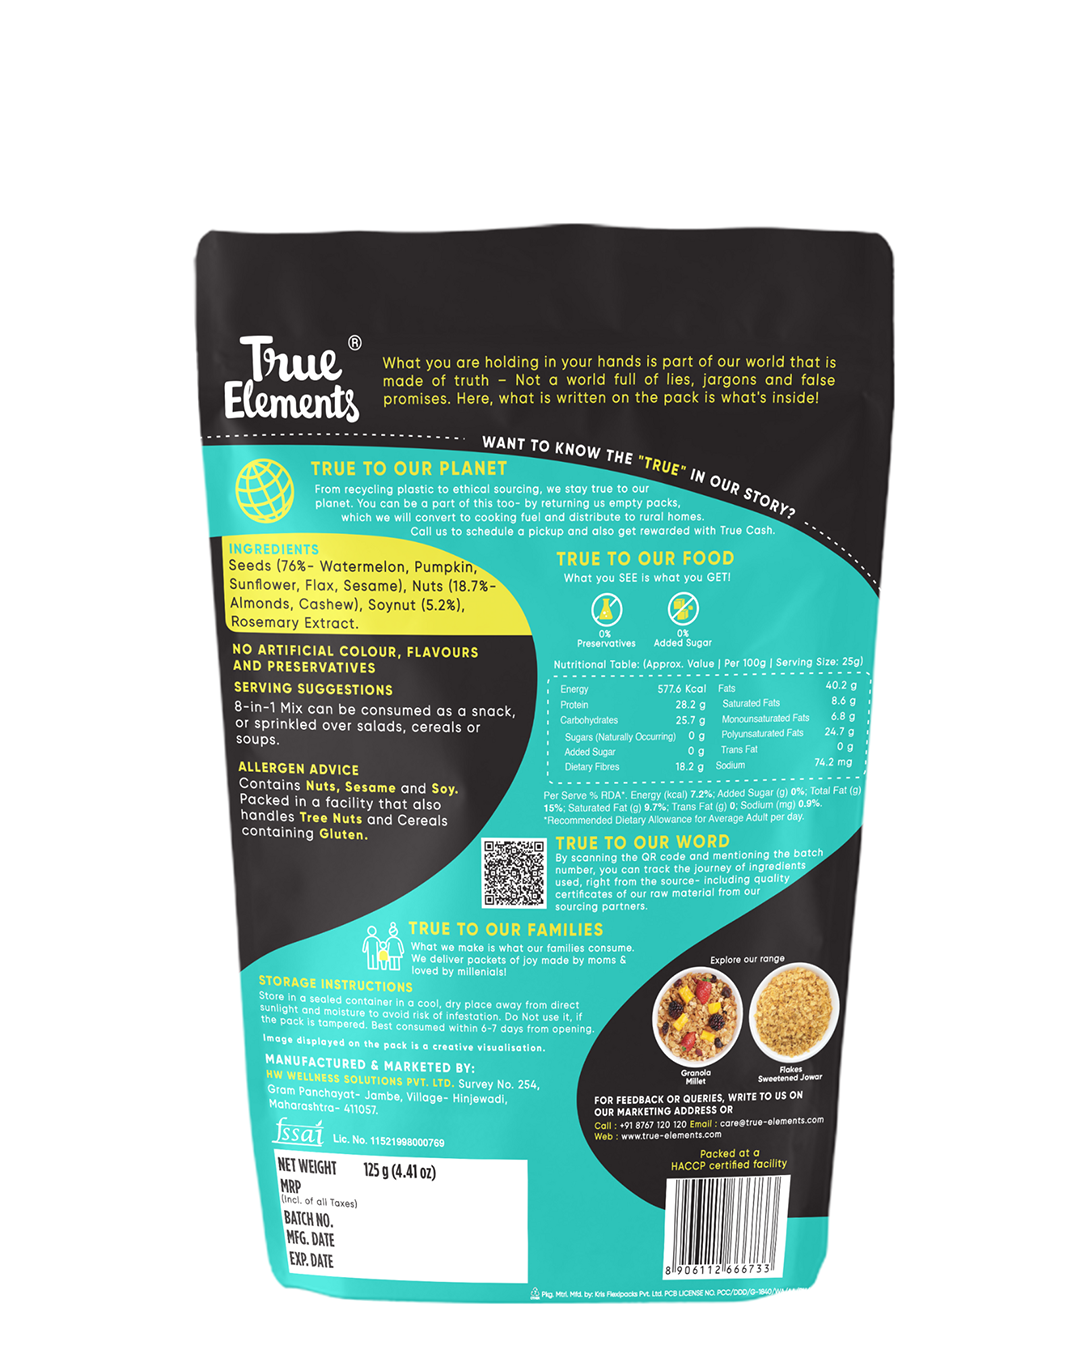 True elements 8 in 1 mix 125g pack ingredients and nutrients